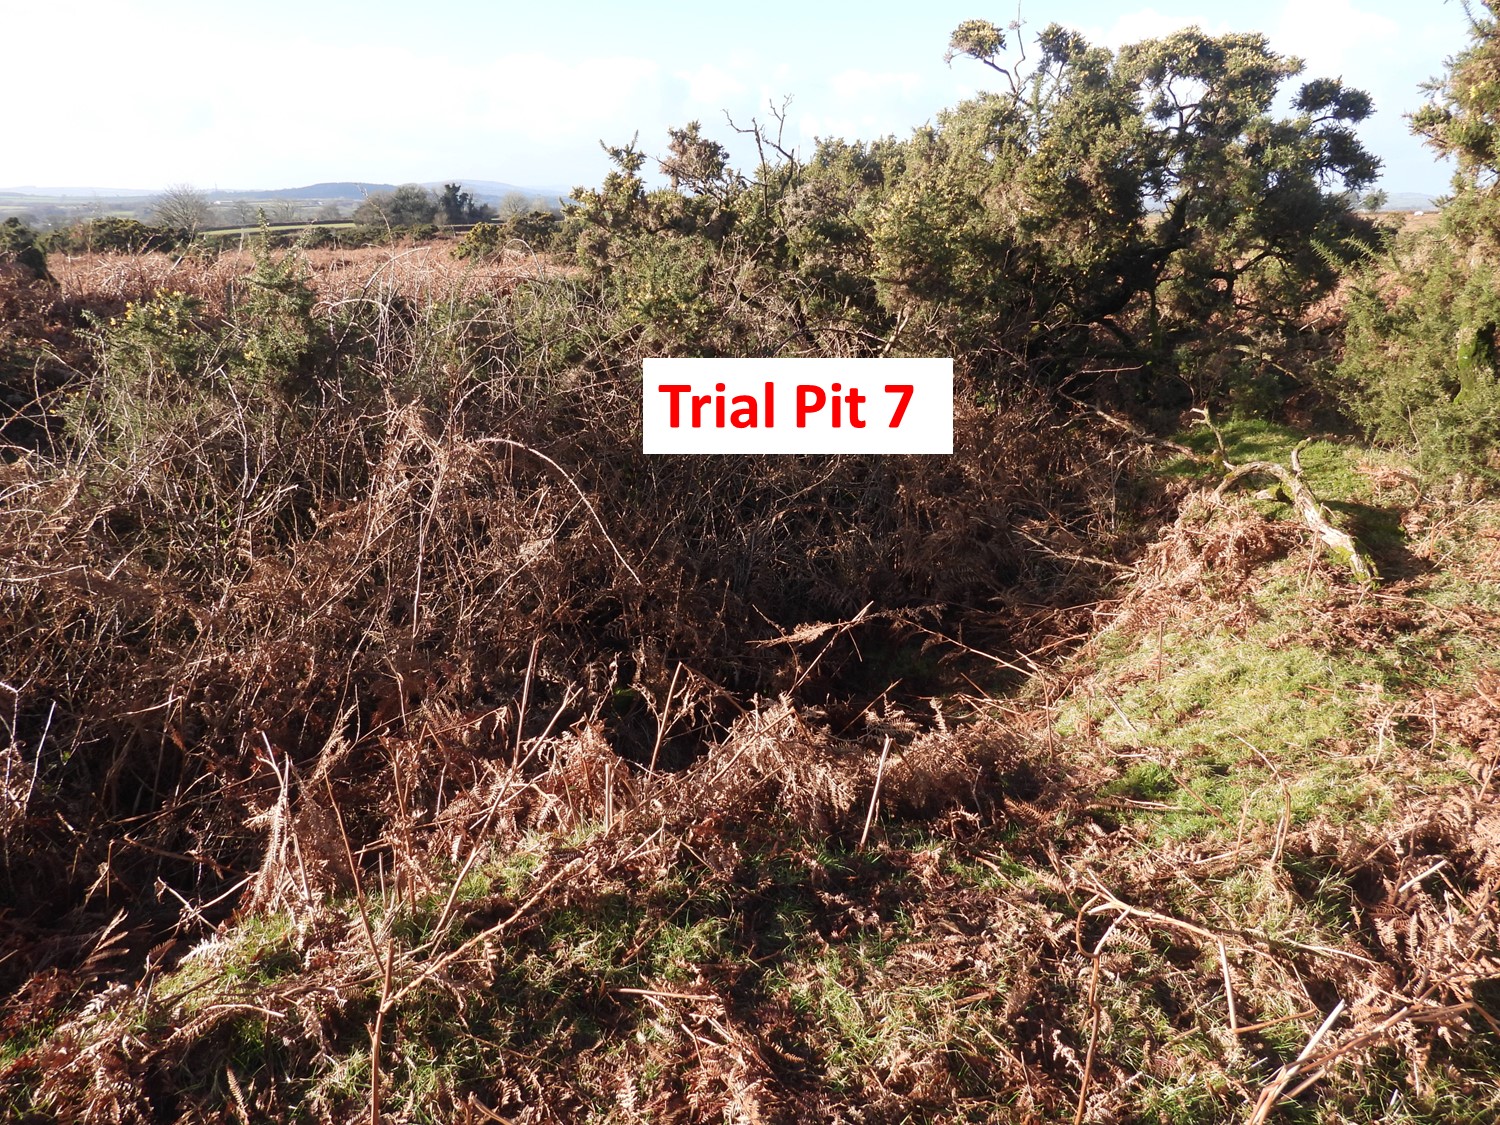 8. Trial Pit 7